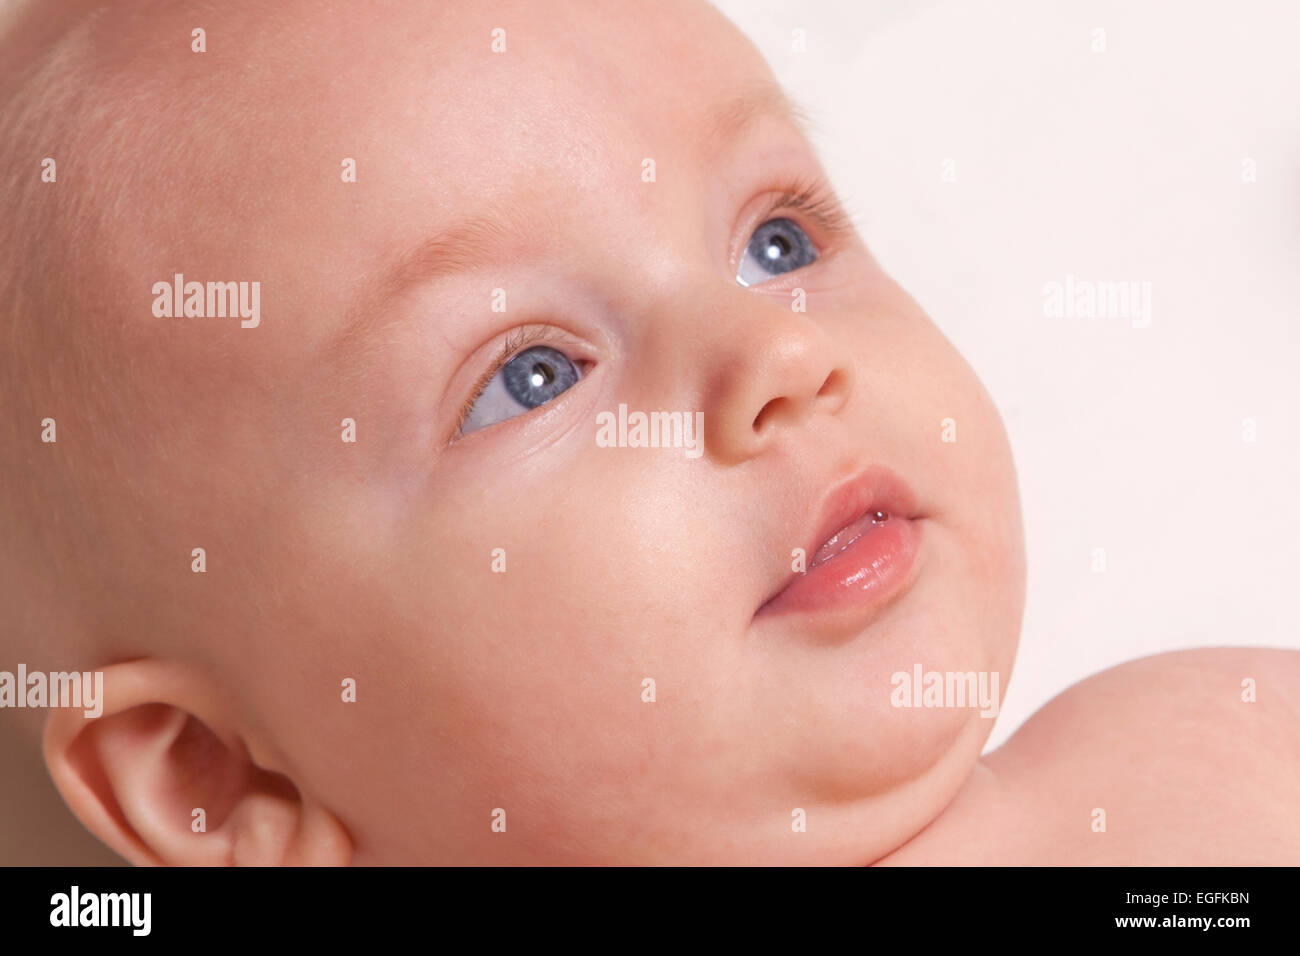 5 month old baby Stock Photo